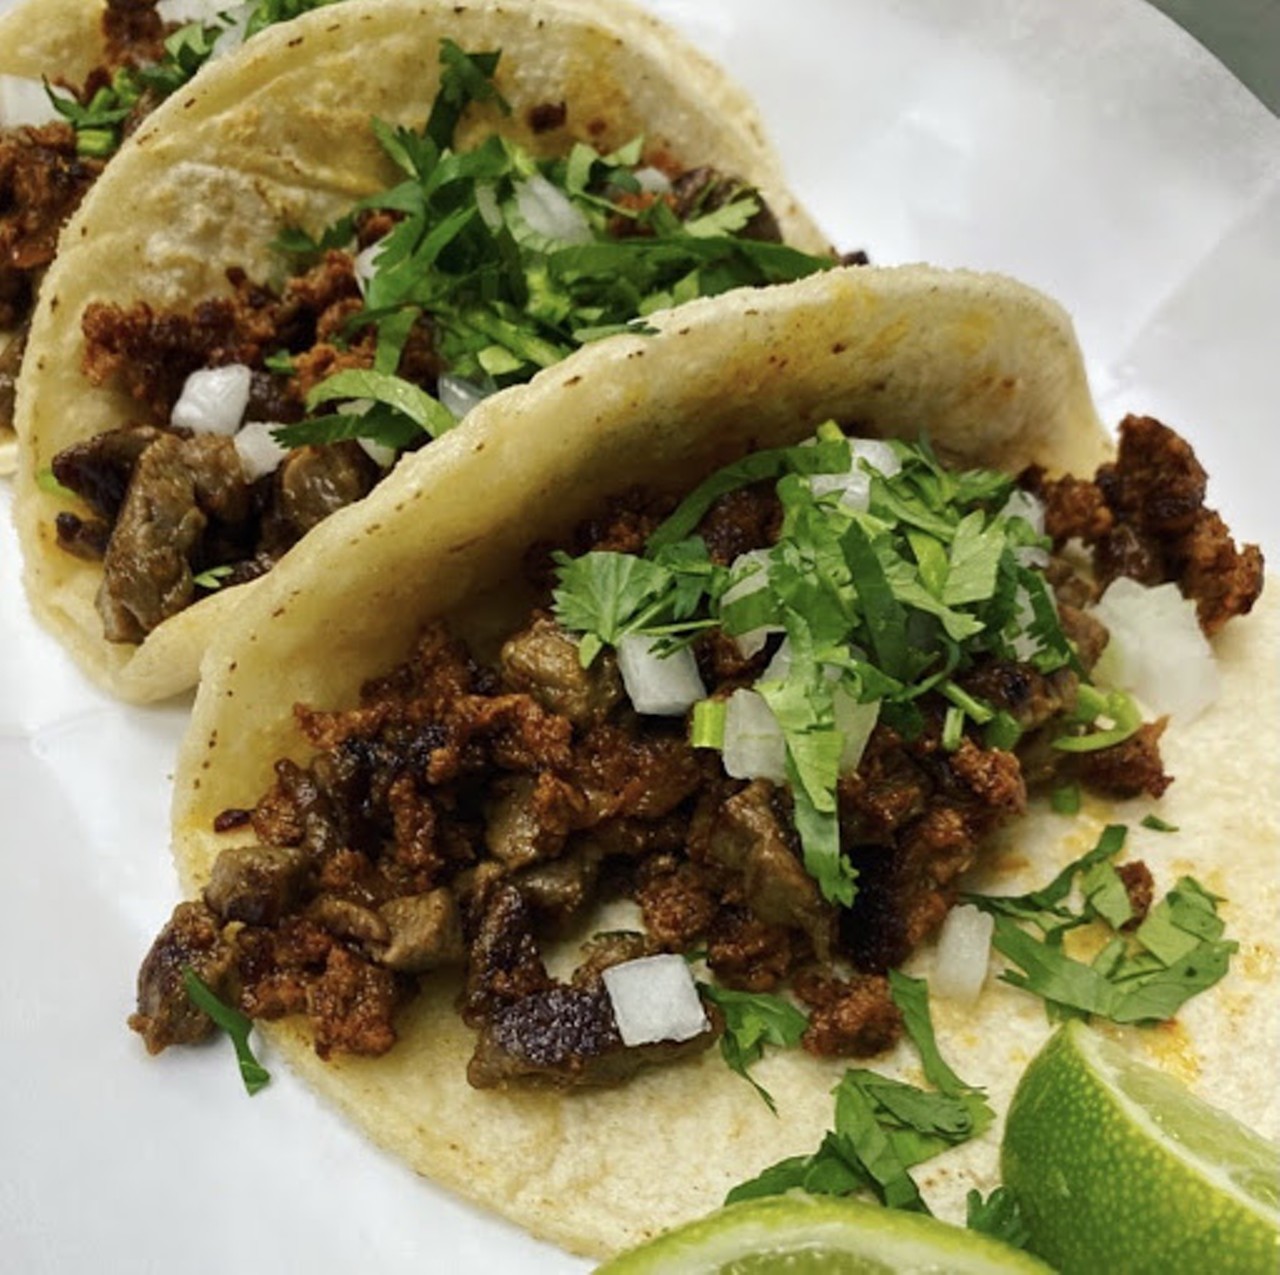 Taqueria Las Cazuelas
10360 E Colonial Dr., Ste 118
2 Tacos and a Side 
Pick any two tacos on a corn tortilla w/ cilantro and onion and side of rice/beans or street corn.
Some restaurants offering larger selection, side and drinks. Click here to see the menus.